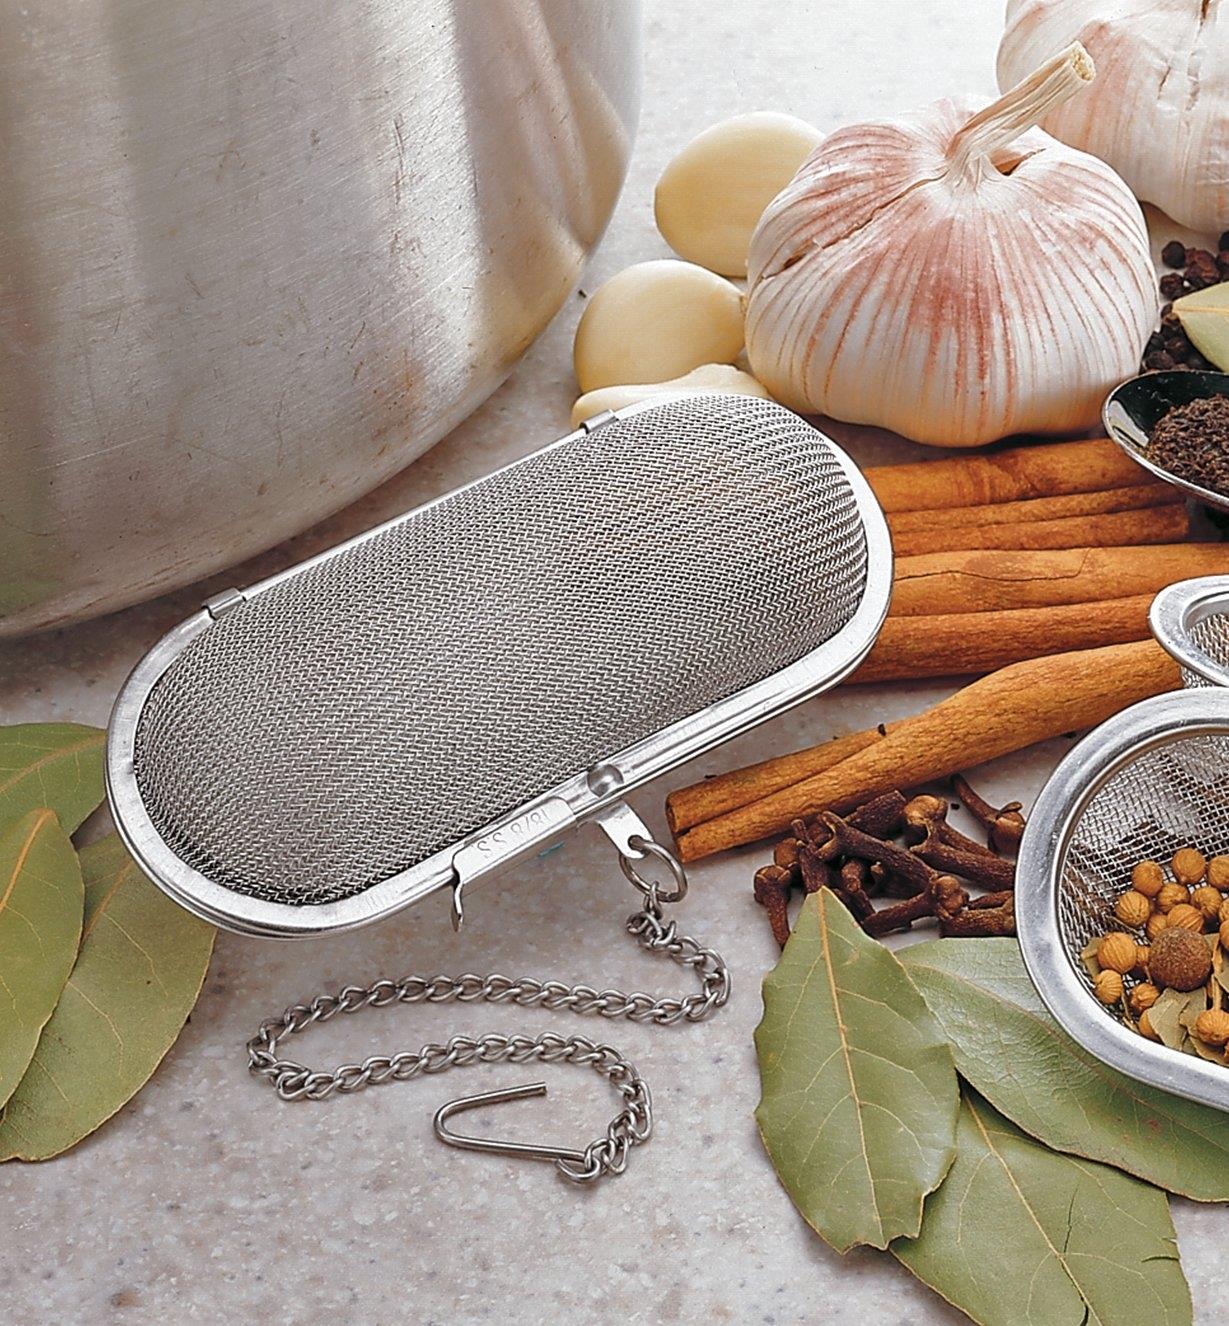 Herb & Spice Infuser on a counter beside a pot and among various herbs and spices